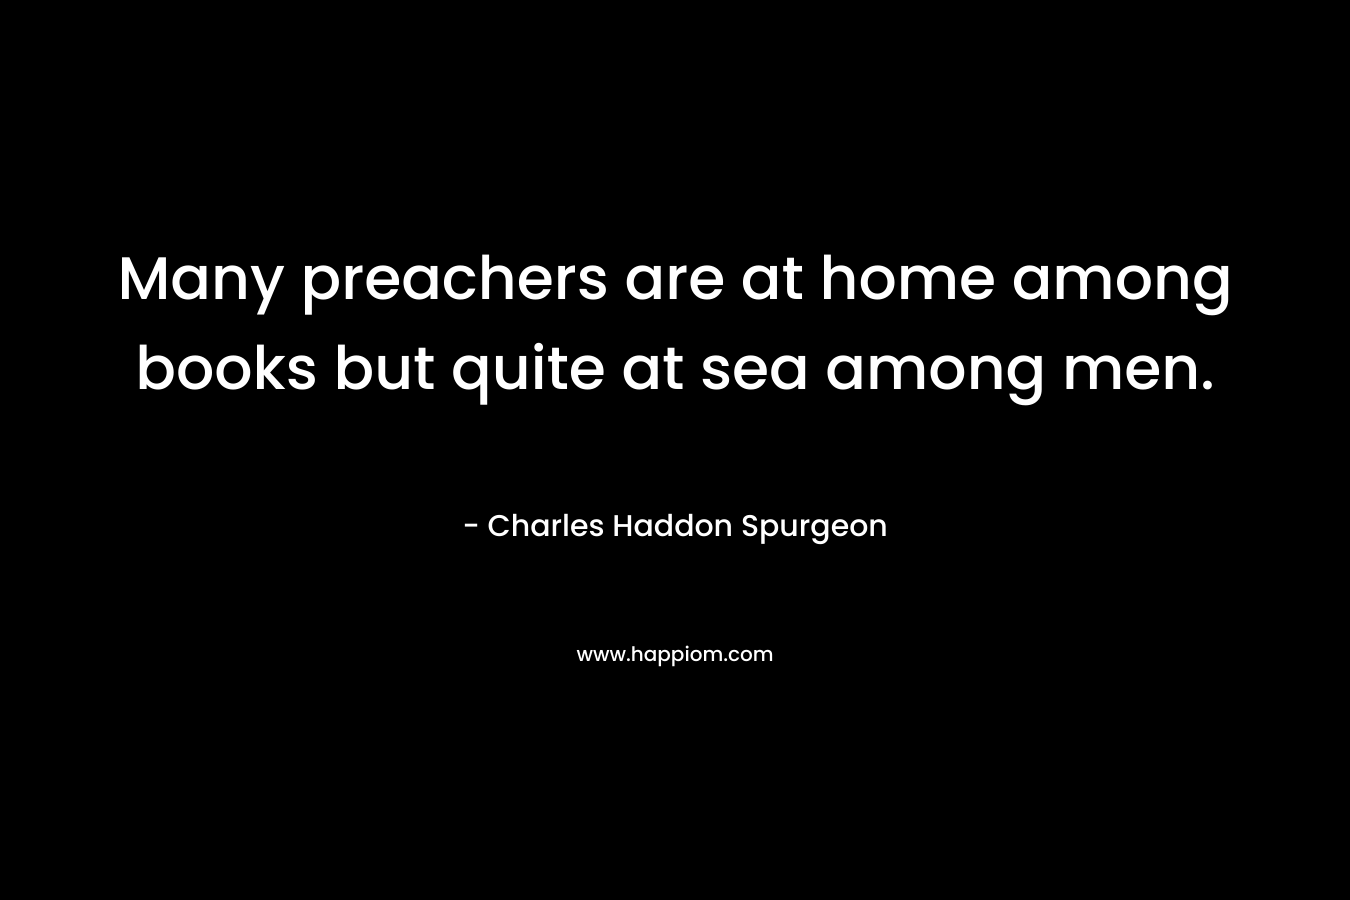 Many preachers are at home among books but quite at sea among men.